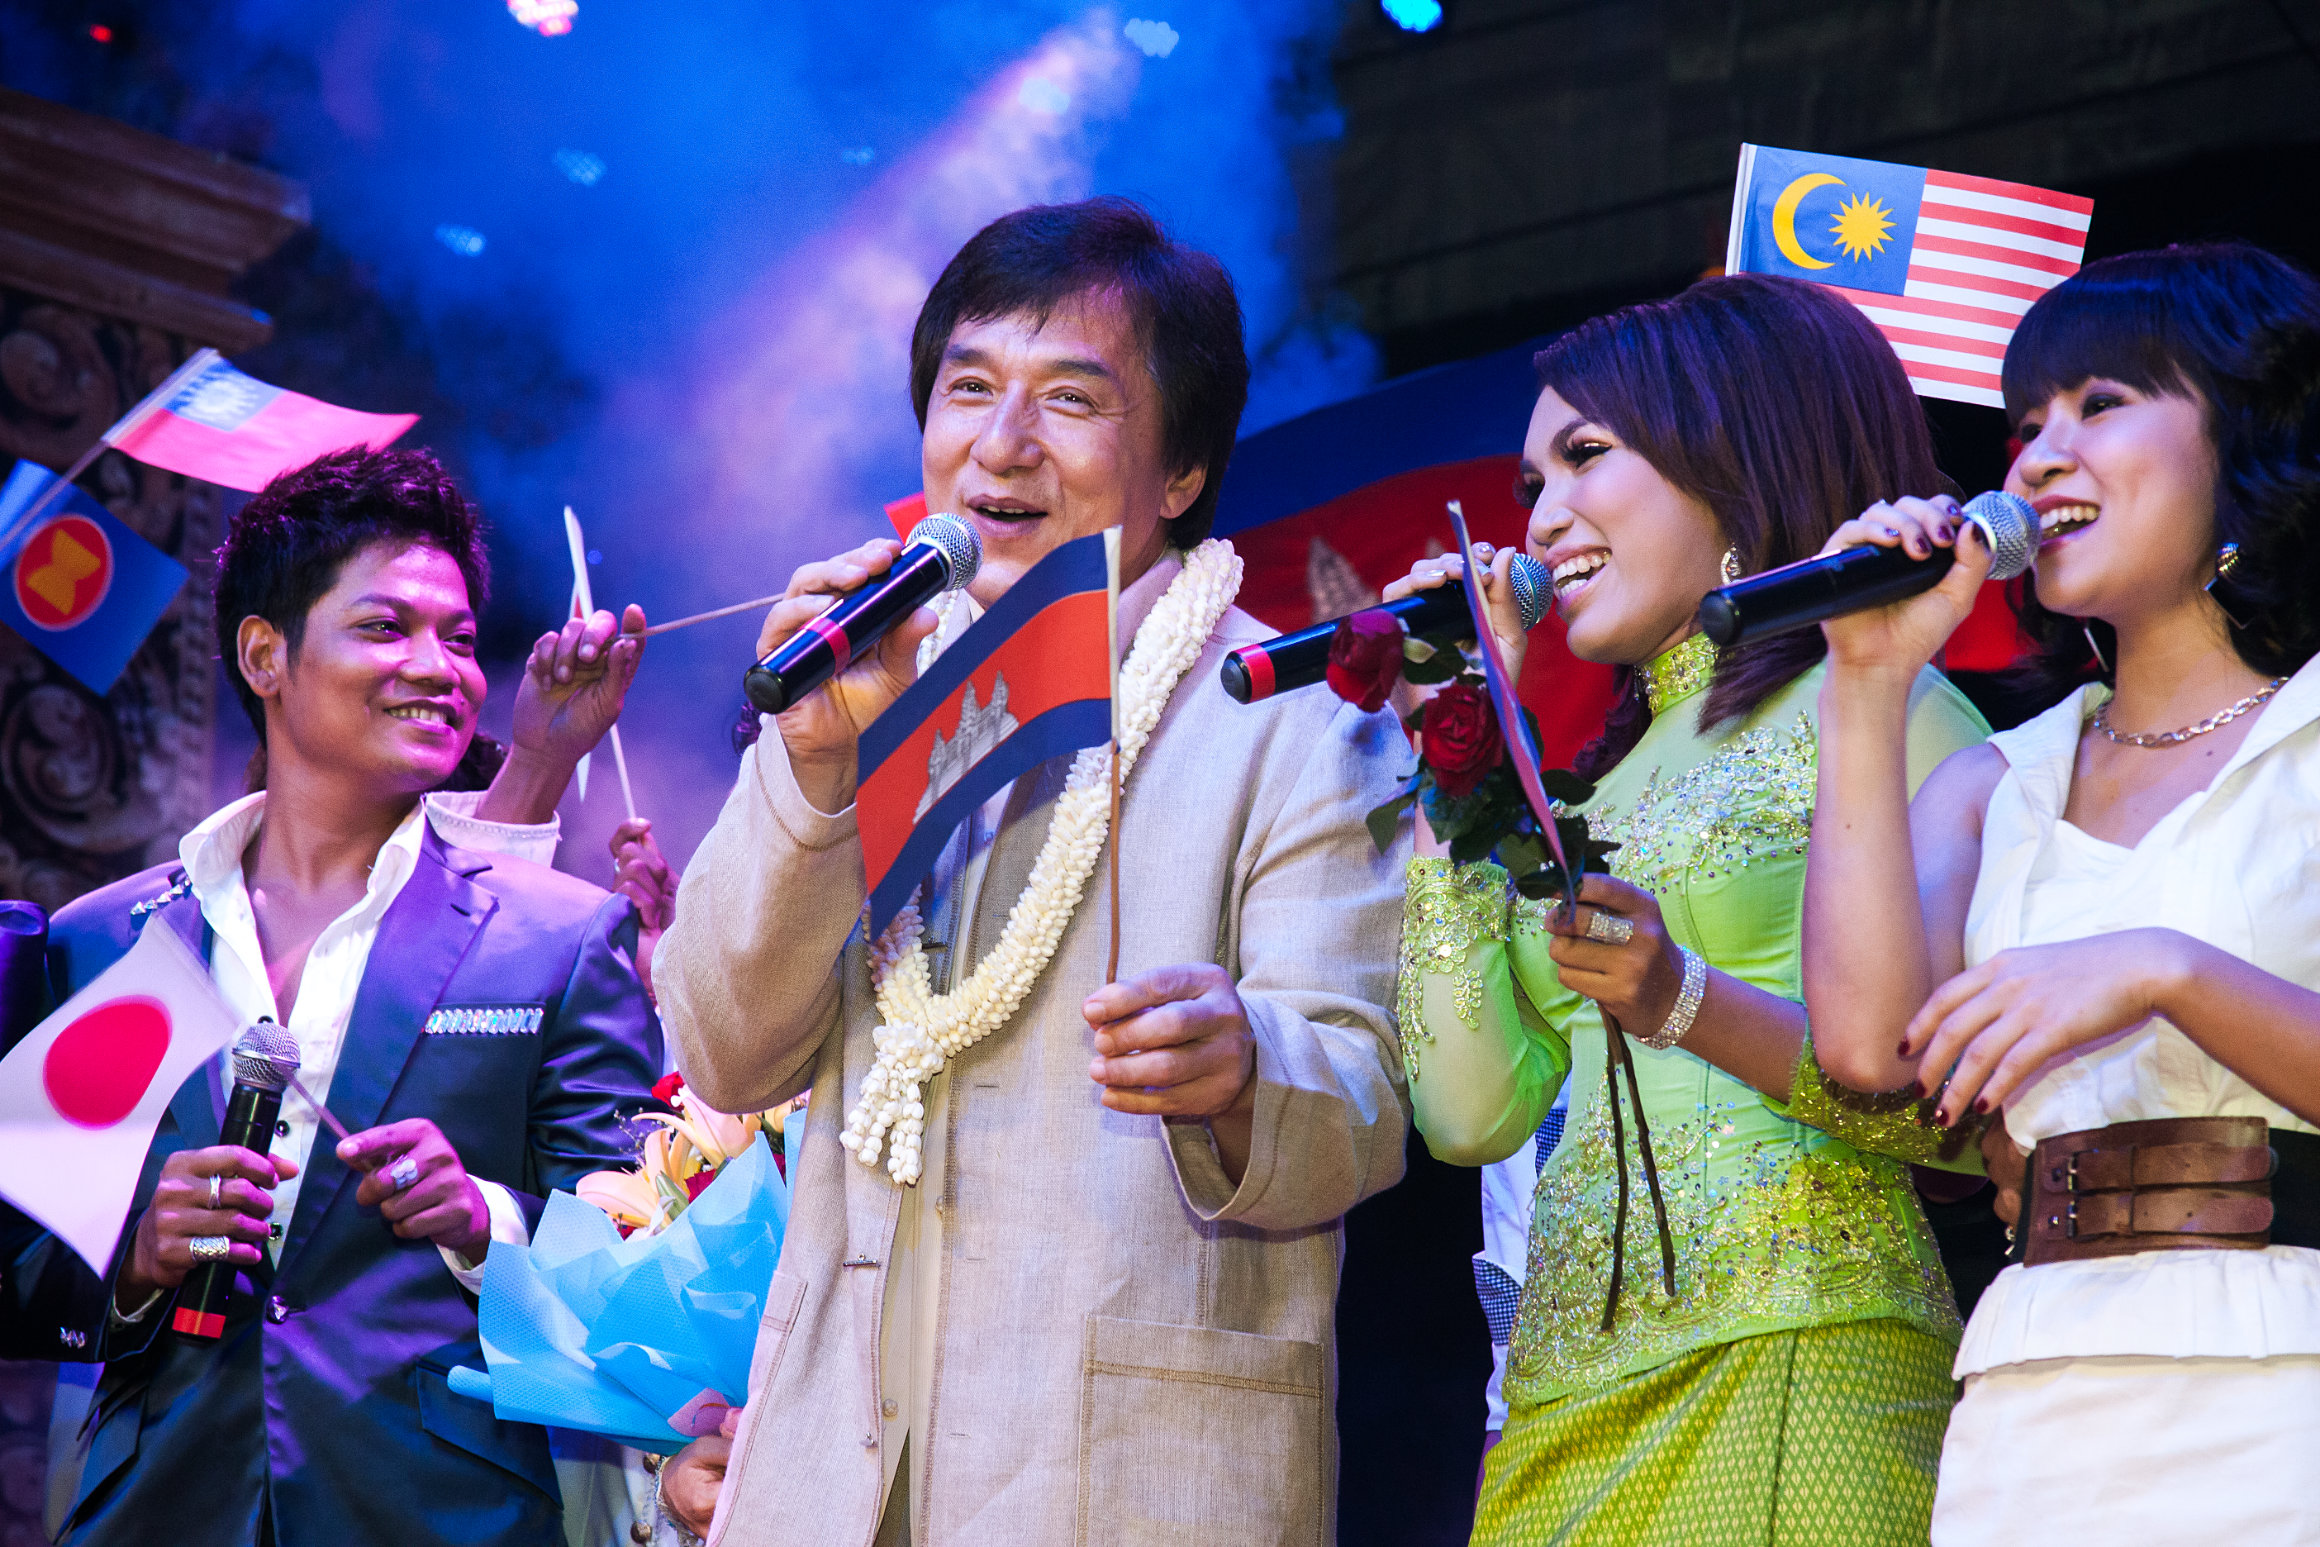 Jackie Chan singing at an NGO concert in Phnom Penh, Cambodia